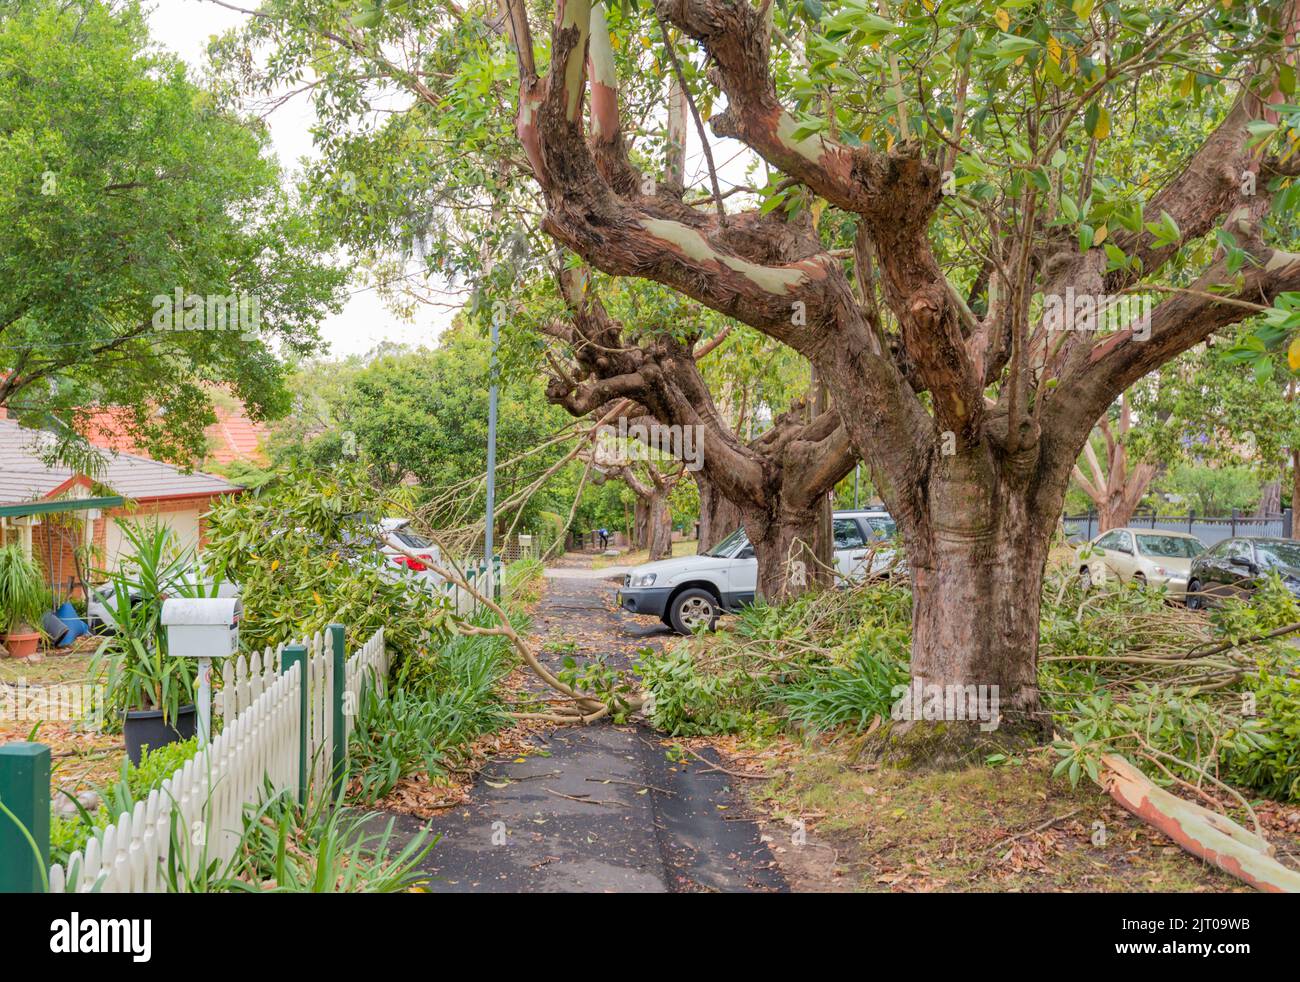 Sydney Aust Nov 26th 2019: A sudden storm ripped through suburbs in northern Sydney snapping trees and power poles leaving carnage but no loss of life Stock Photo